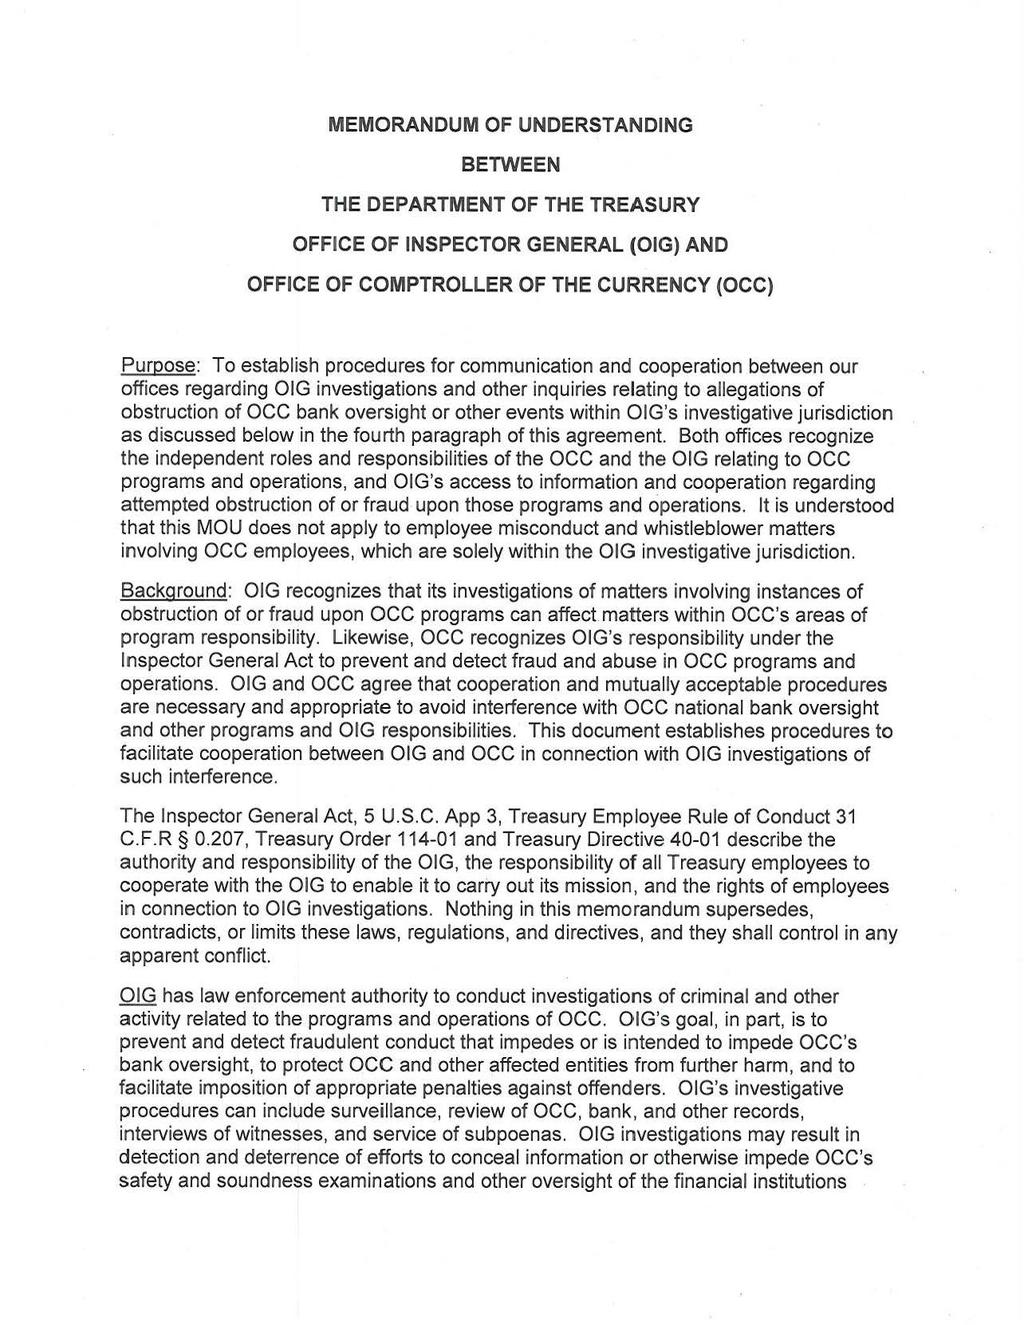 MEMORANDUM OF UNDERSTANDING BETWEEN THE DEPARTMENT OF THE TREASURY OFFICE OF INSPECTOR GENERAL (OIG) AND OFFICE OF COMPTROLLER OF THE CURRENCY (OCC) Purpose: To establish procedures for communication